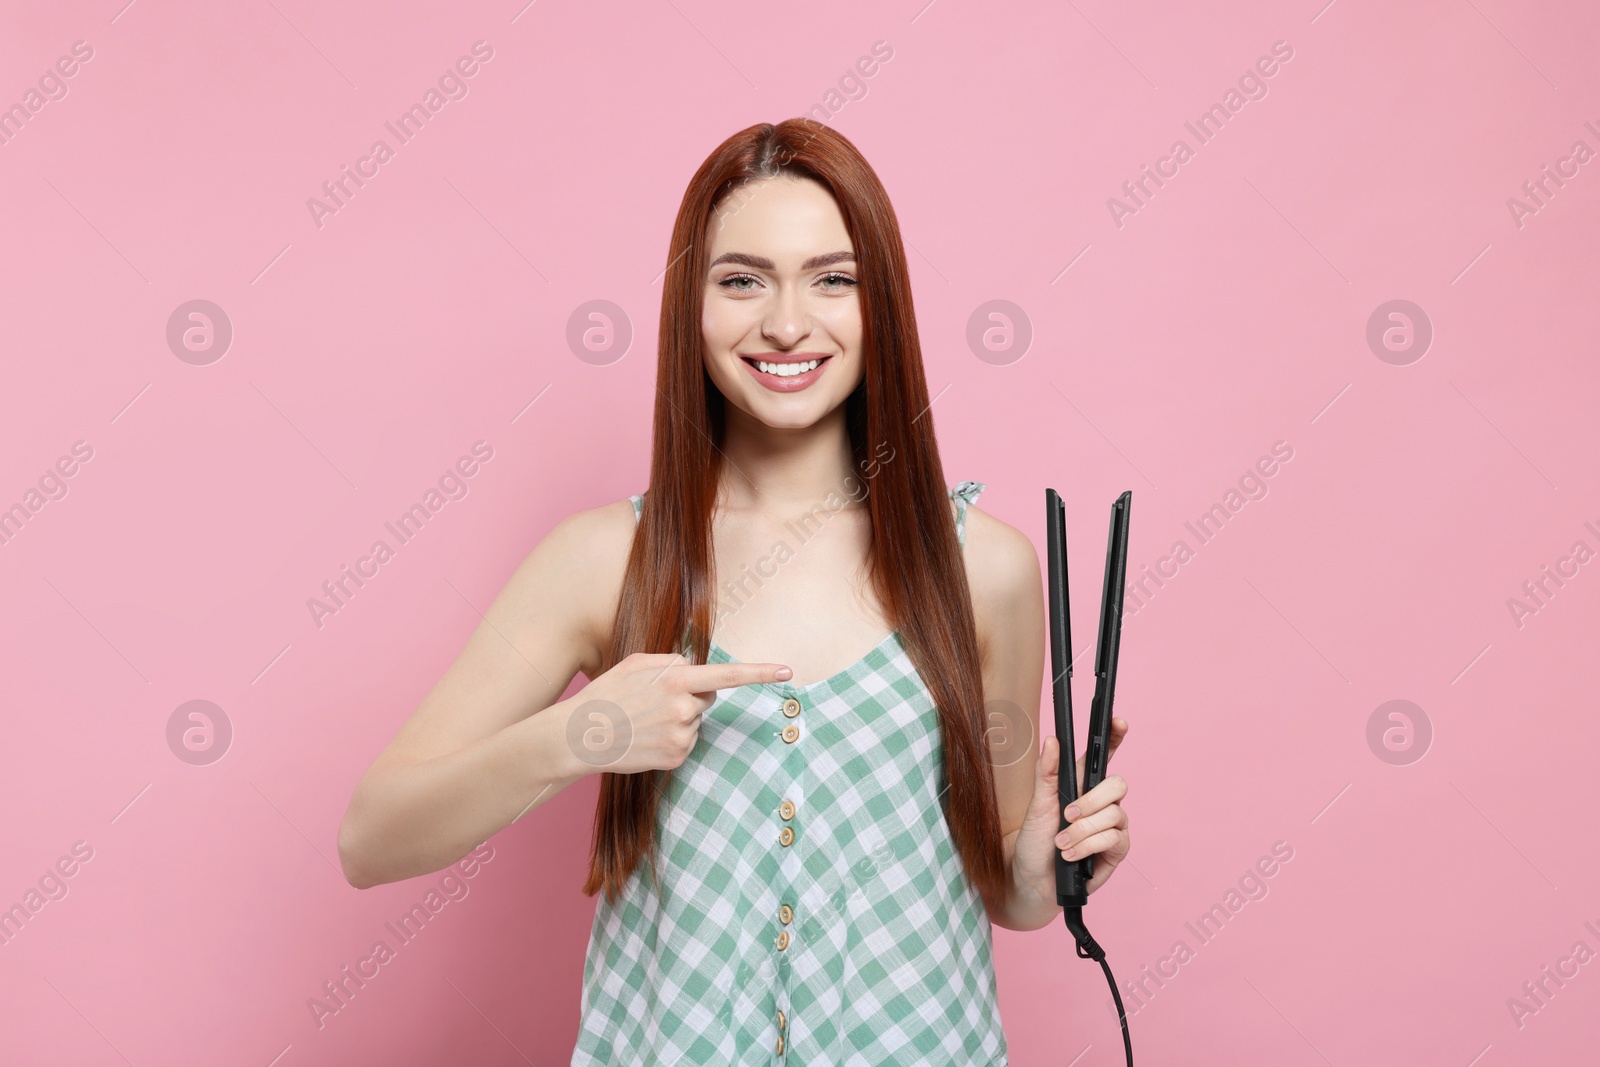 Photo of Beautiful woman pointing at hair iron on pink background